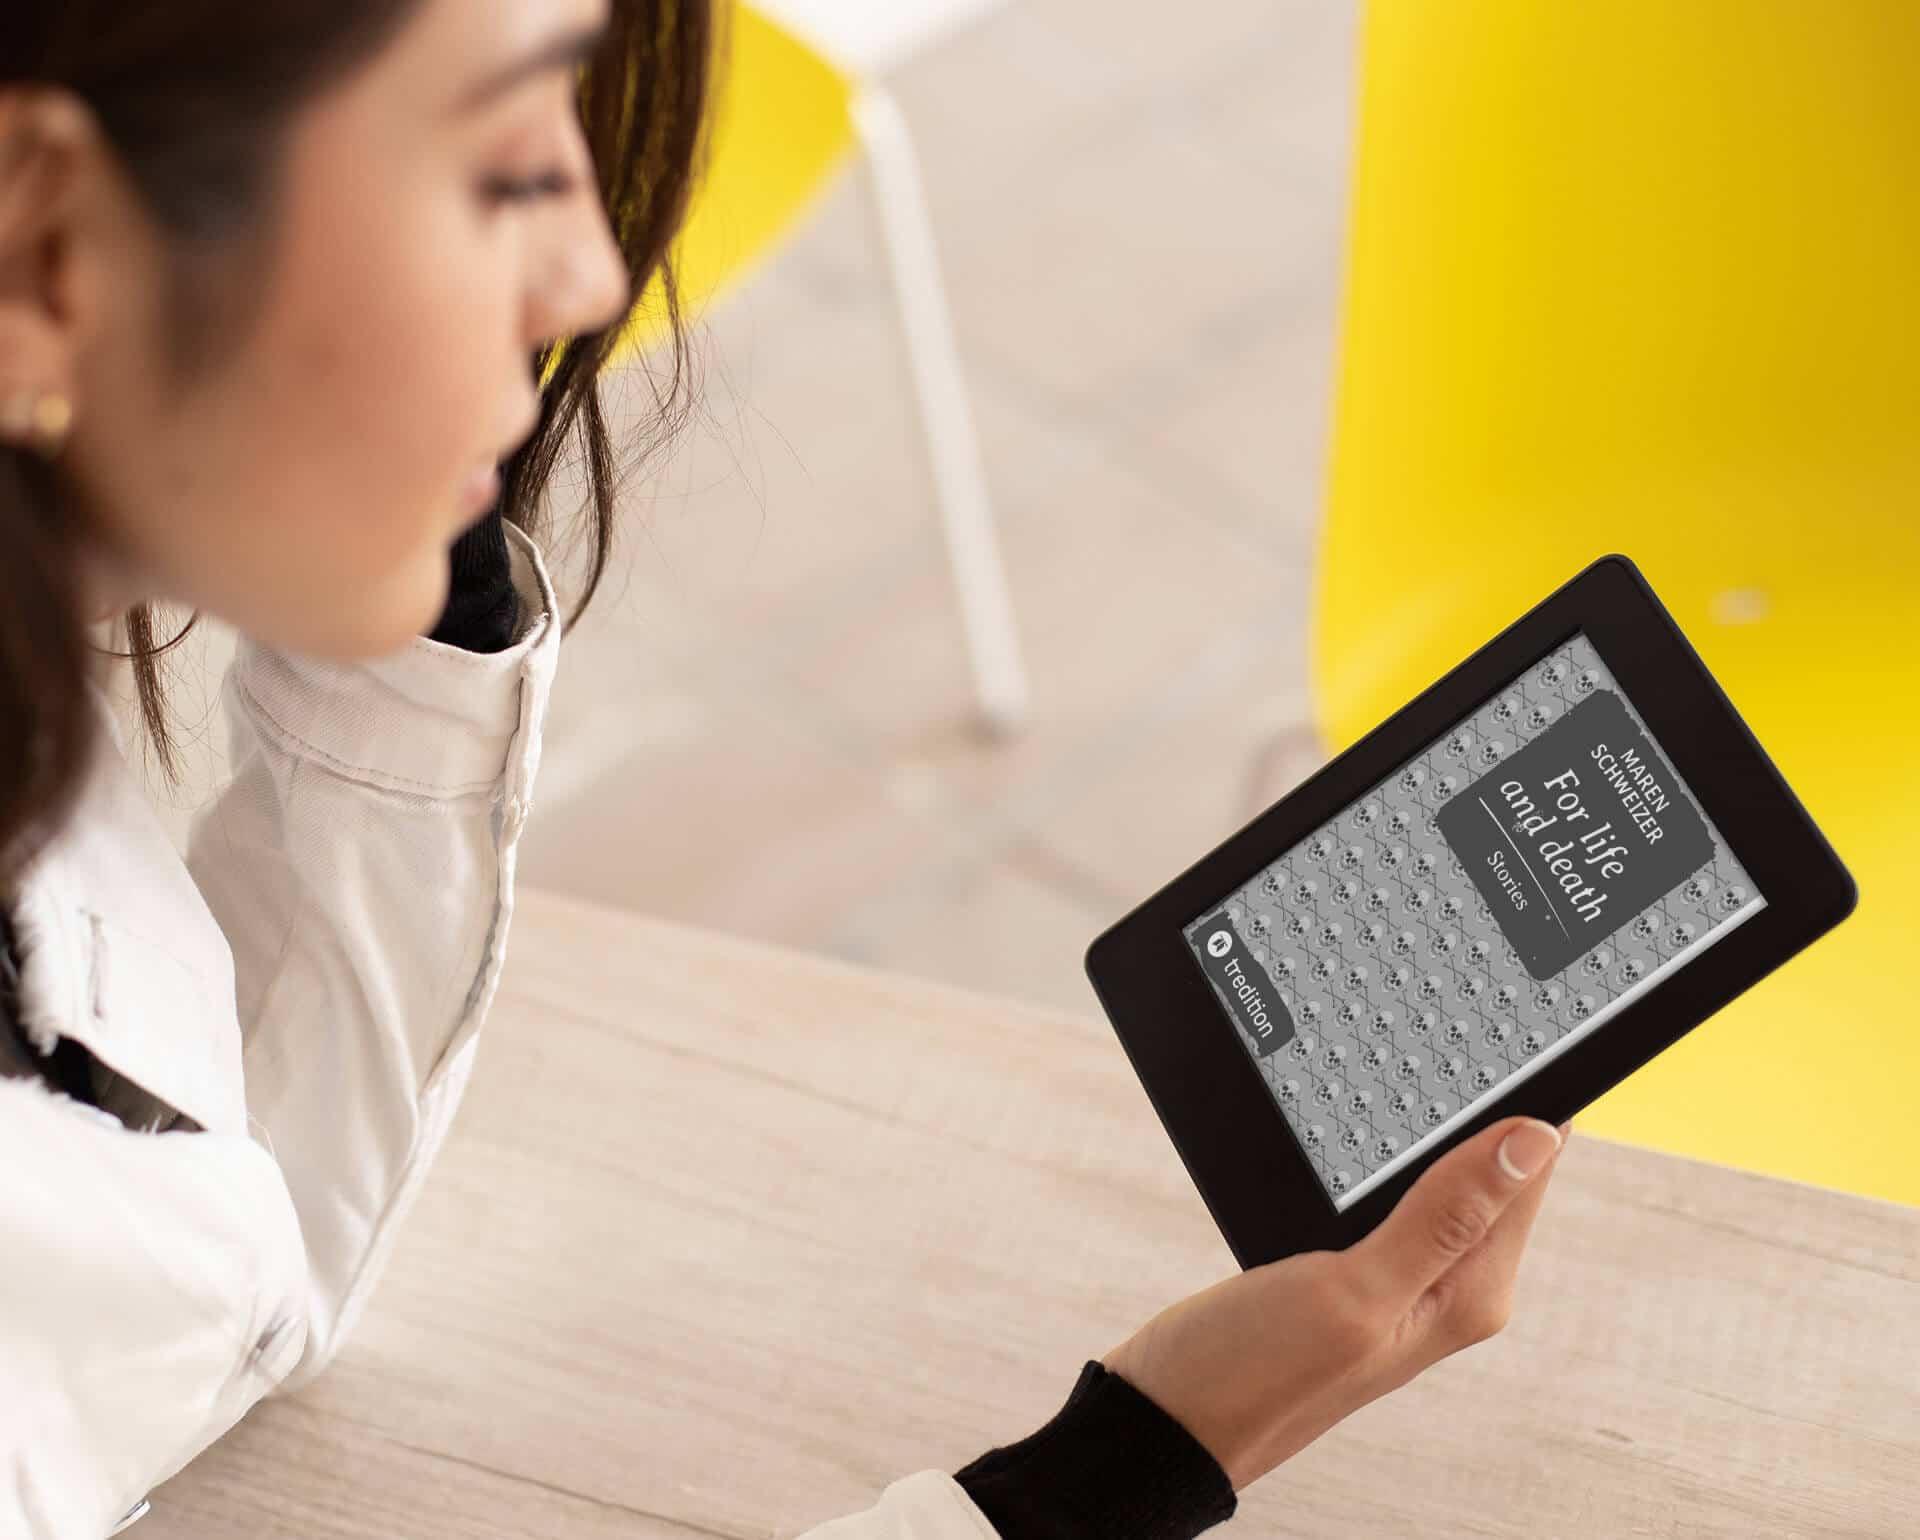 Woman reads e-book produced digitally via tredition at no extra cost